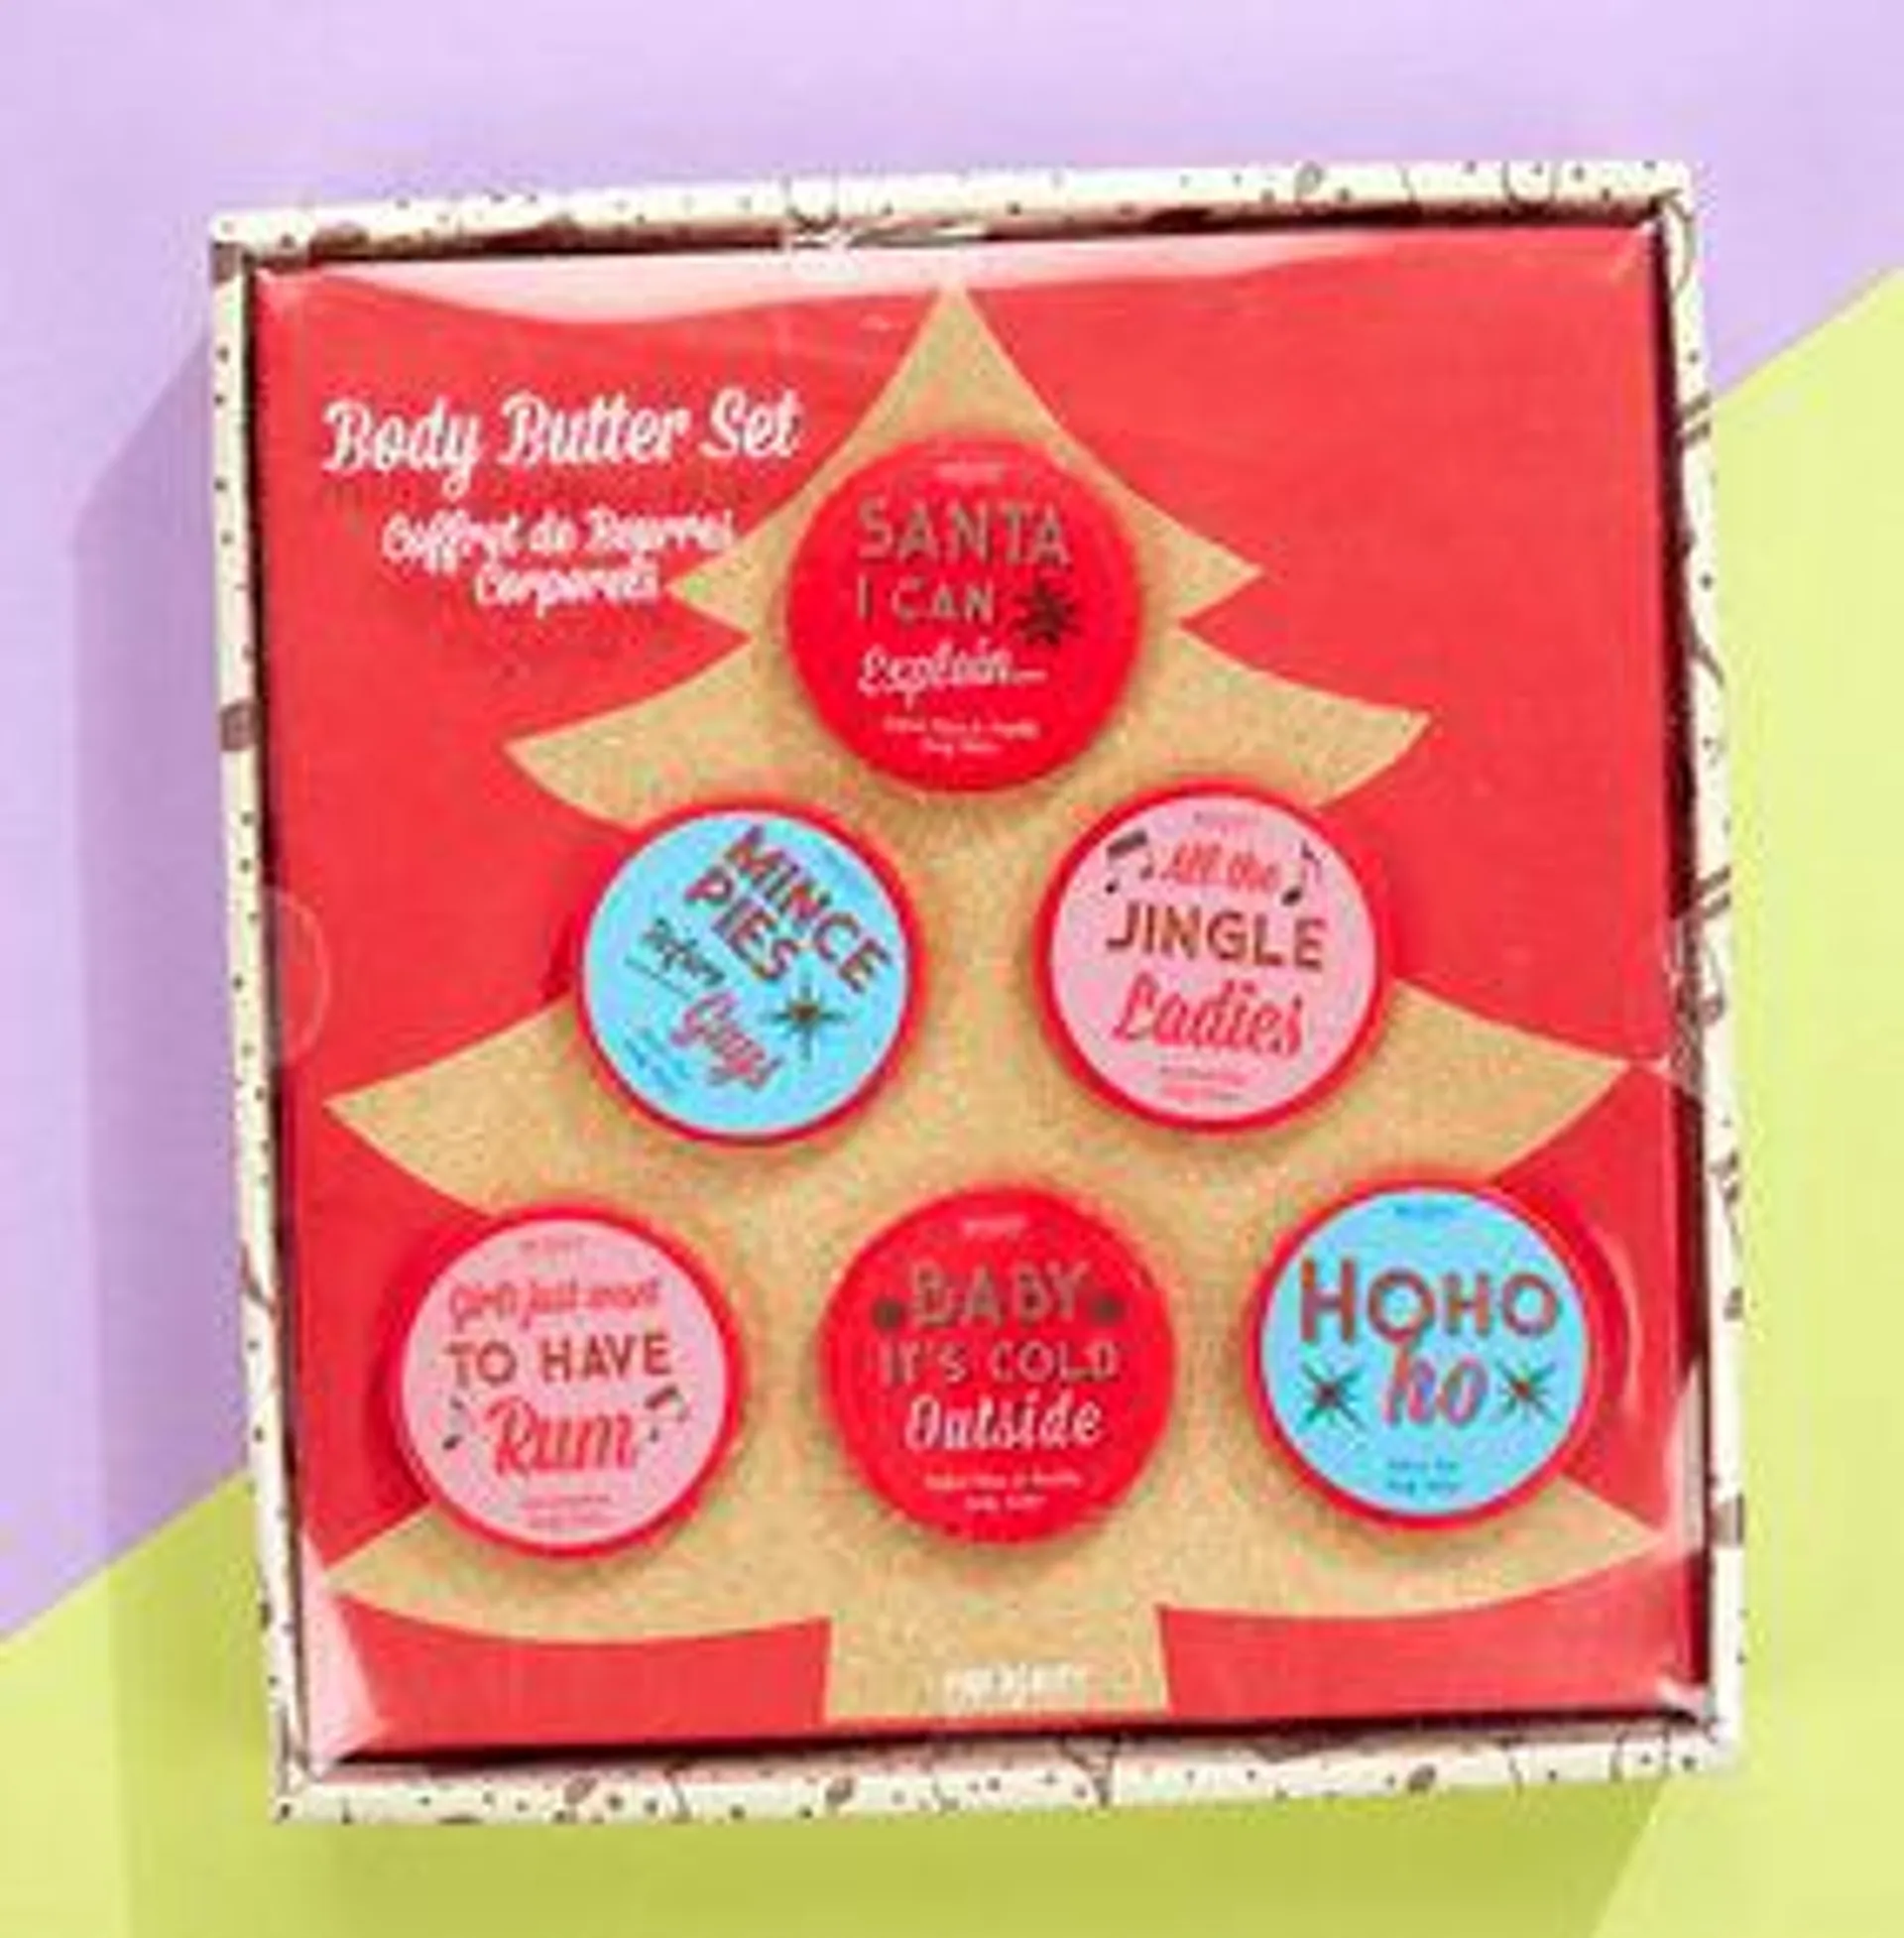 Jingle Ladies Body Butter Gift Set WAS £14.99 NOW £8.99